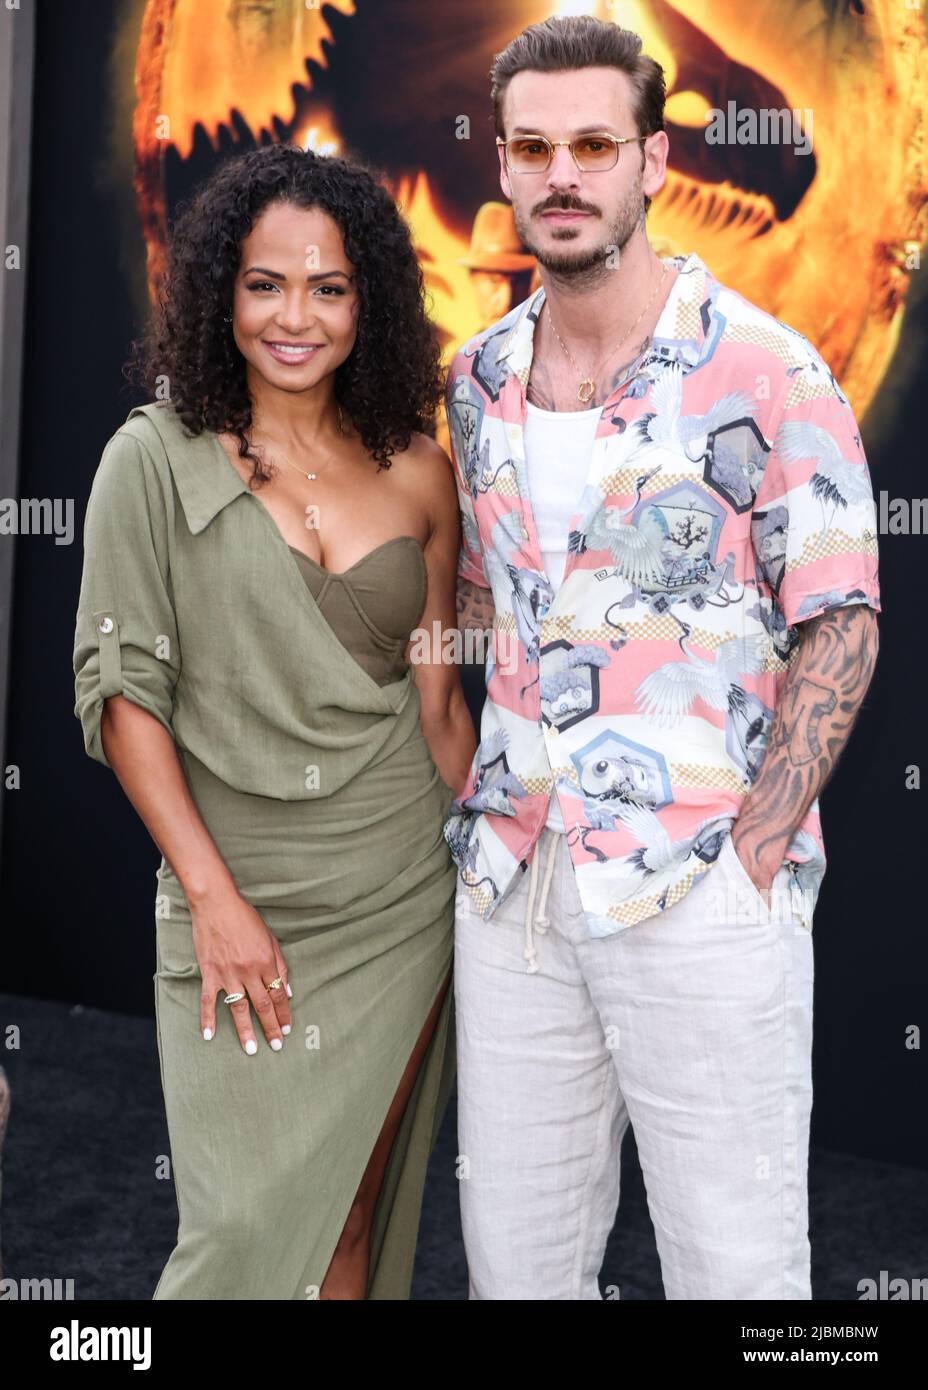 HOLLYWOOD, LOS ANGELES, CALIFORNIA, USA - JUNE 06: American actress Christina Milian and husband/French singer Matt Pokora arrive at the Los Angeles Premiere Of Universal Pictures' 'Jurassic World Dominion' held at the TCL Chinese Theatre IMAX on June 6, 2022 in Hollywood, Los Angeles, California, United States. (Photo by Xavier Collin/Image Press Agency) Stock Photo